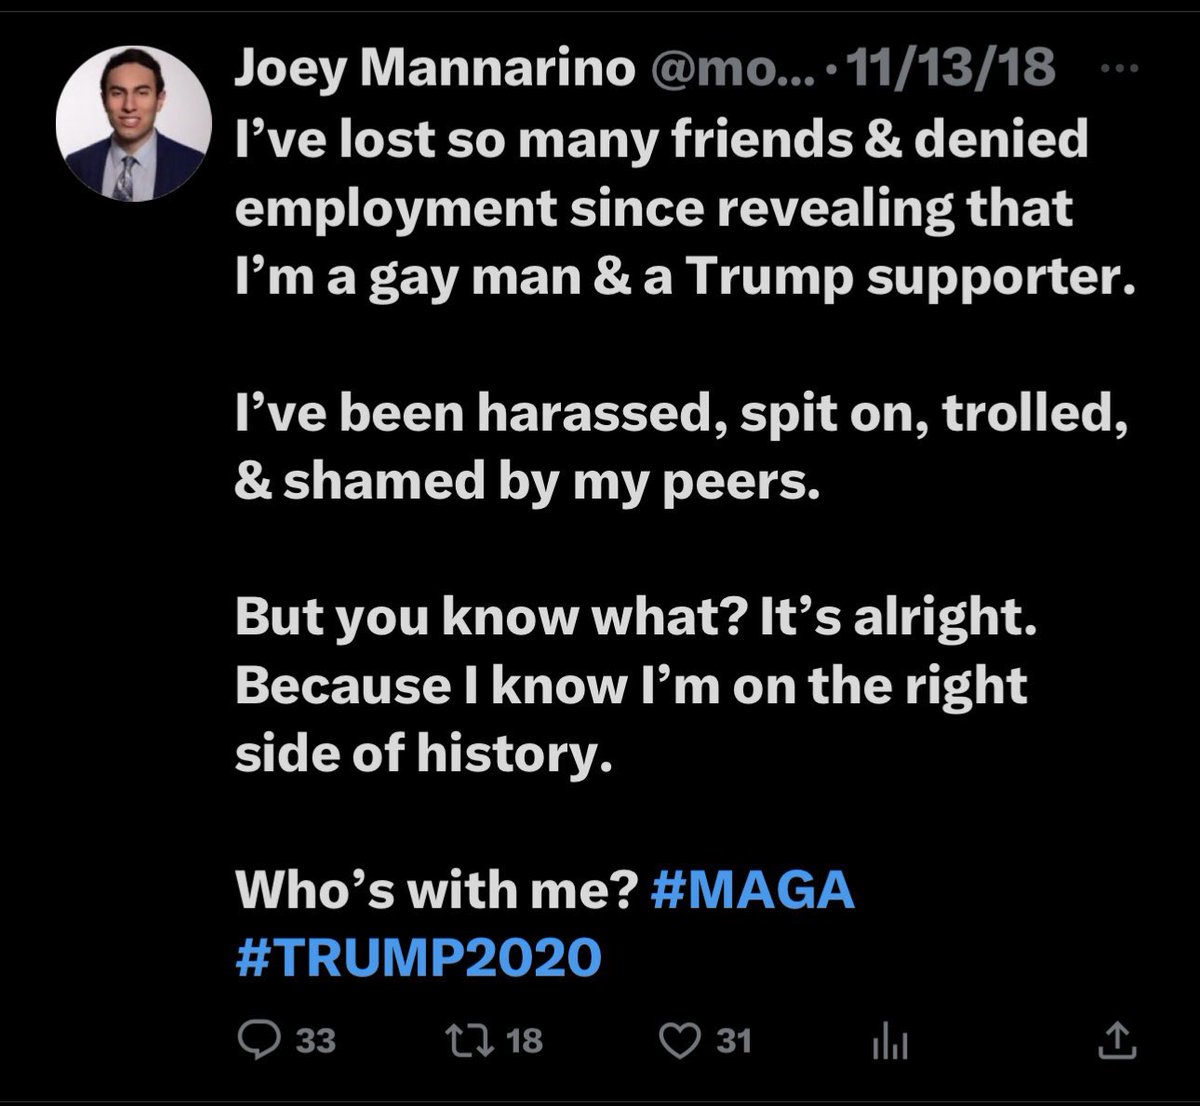 @JoeyMannarinoUS Joey doesn't work. Seriously he does not work. He is a lowlife bum. He does make money from Elon for tweeting as much disgusting filth, accusations, hate etc. Look at his time-line and check the times for tweets every day and night.